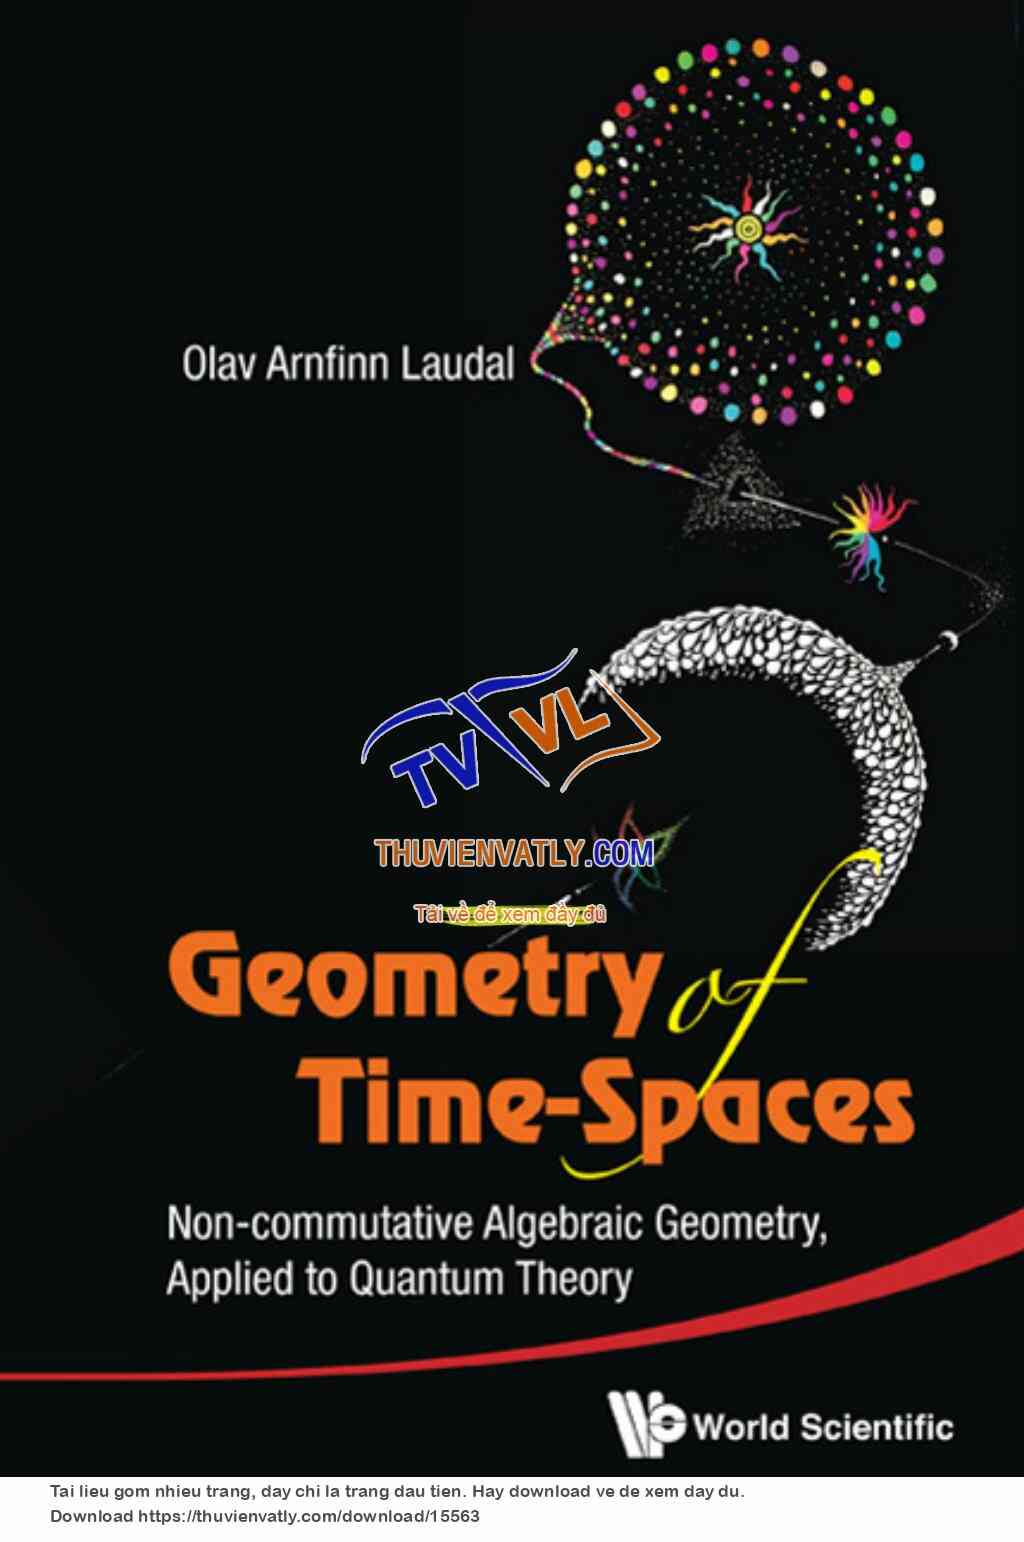 Geometry of Time-Spaces Non-Commutative Algebraic Geometry, Applied to Quantum Theory  - O. Laudal (World, 2011)